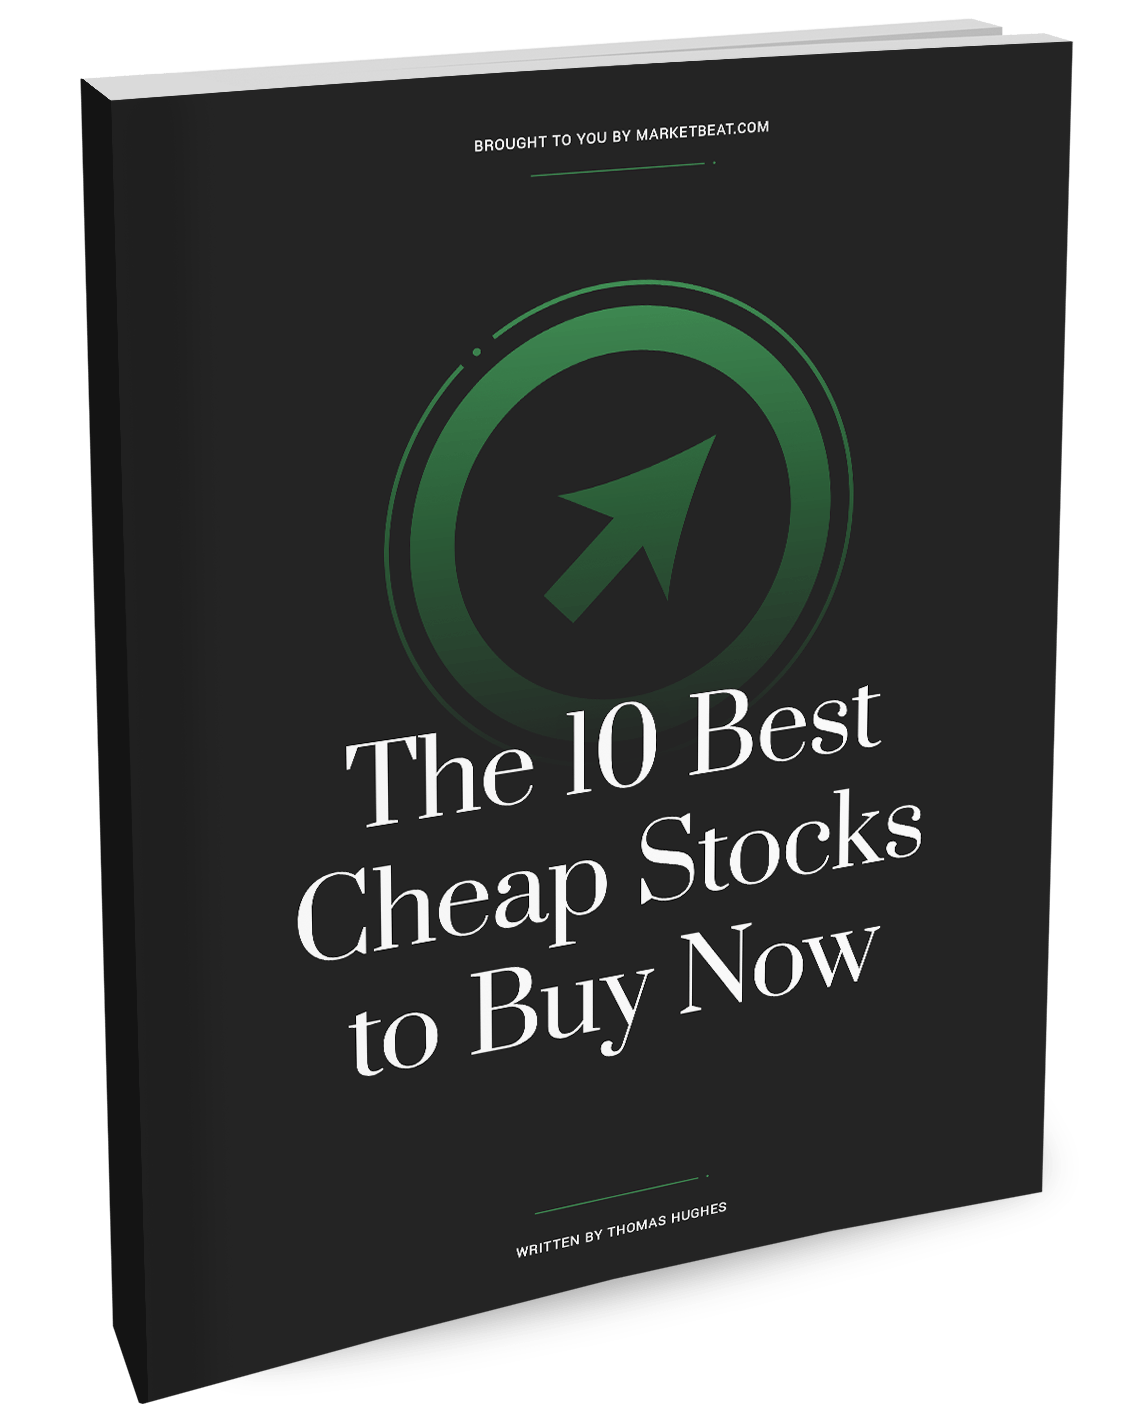 Top 10 Cheap Stocks To Buy Now